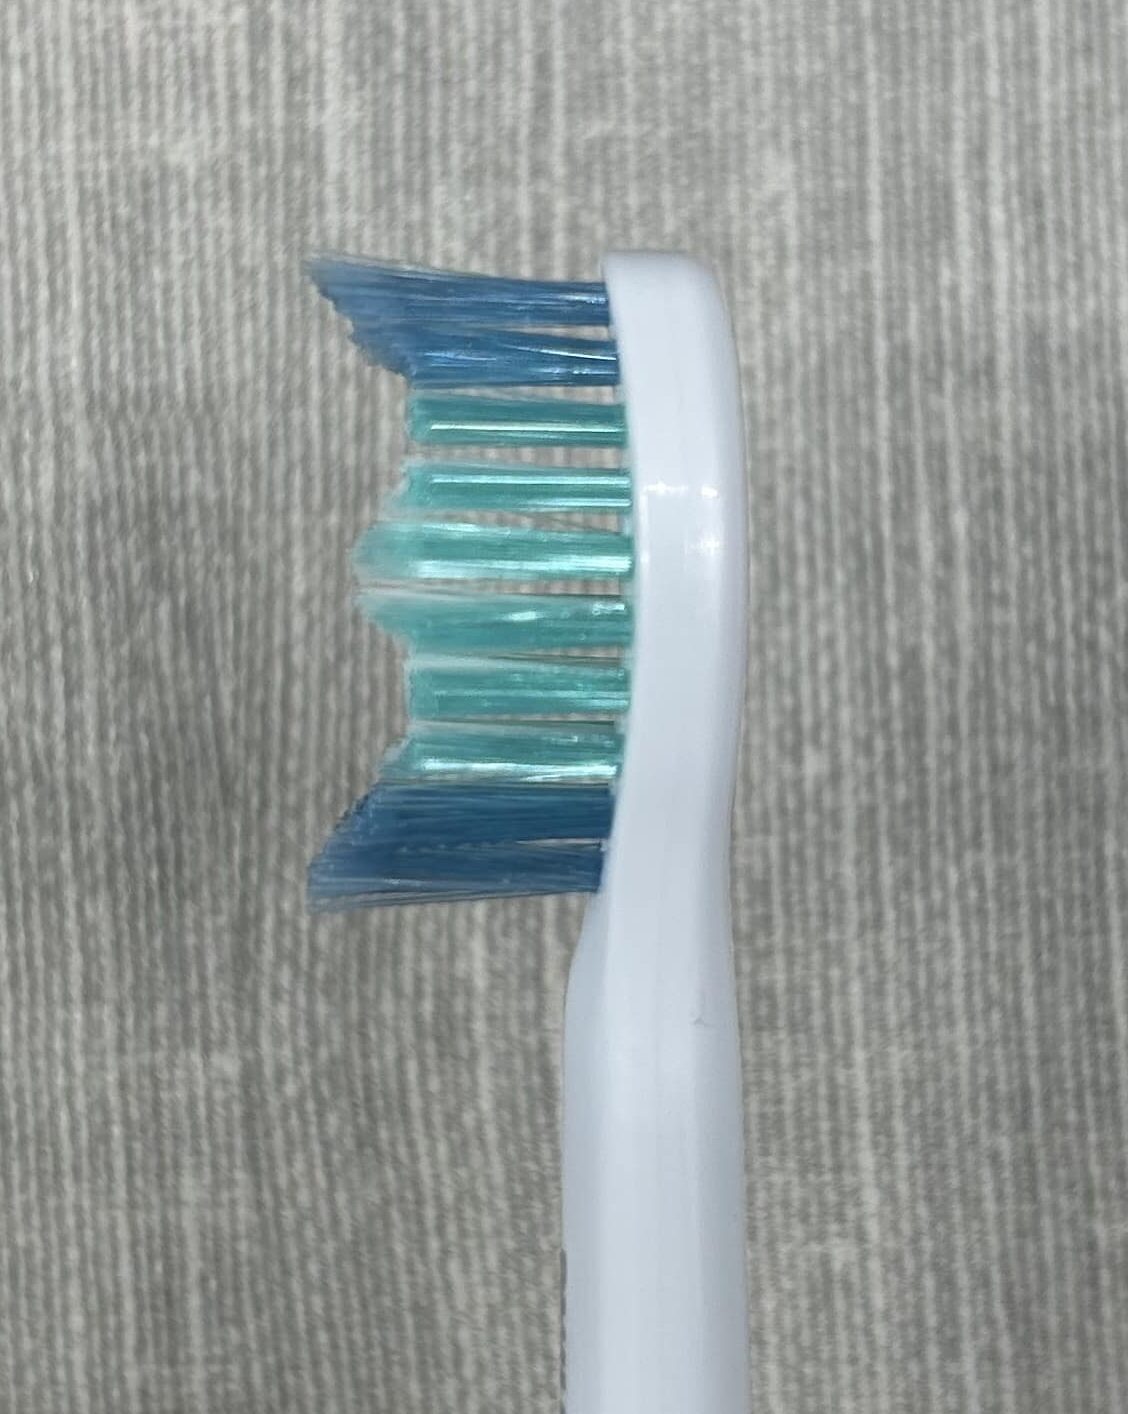 Philips Sonicare DailyClean 1100 Electric Toothbrush | My Dental Advocate